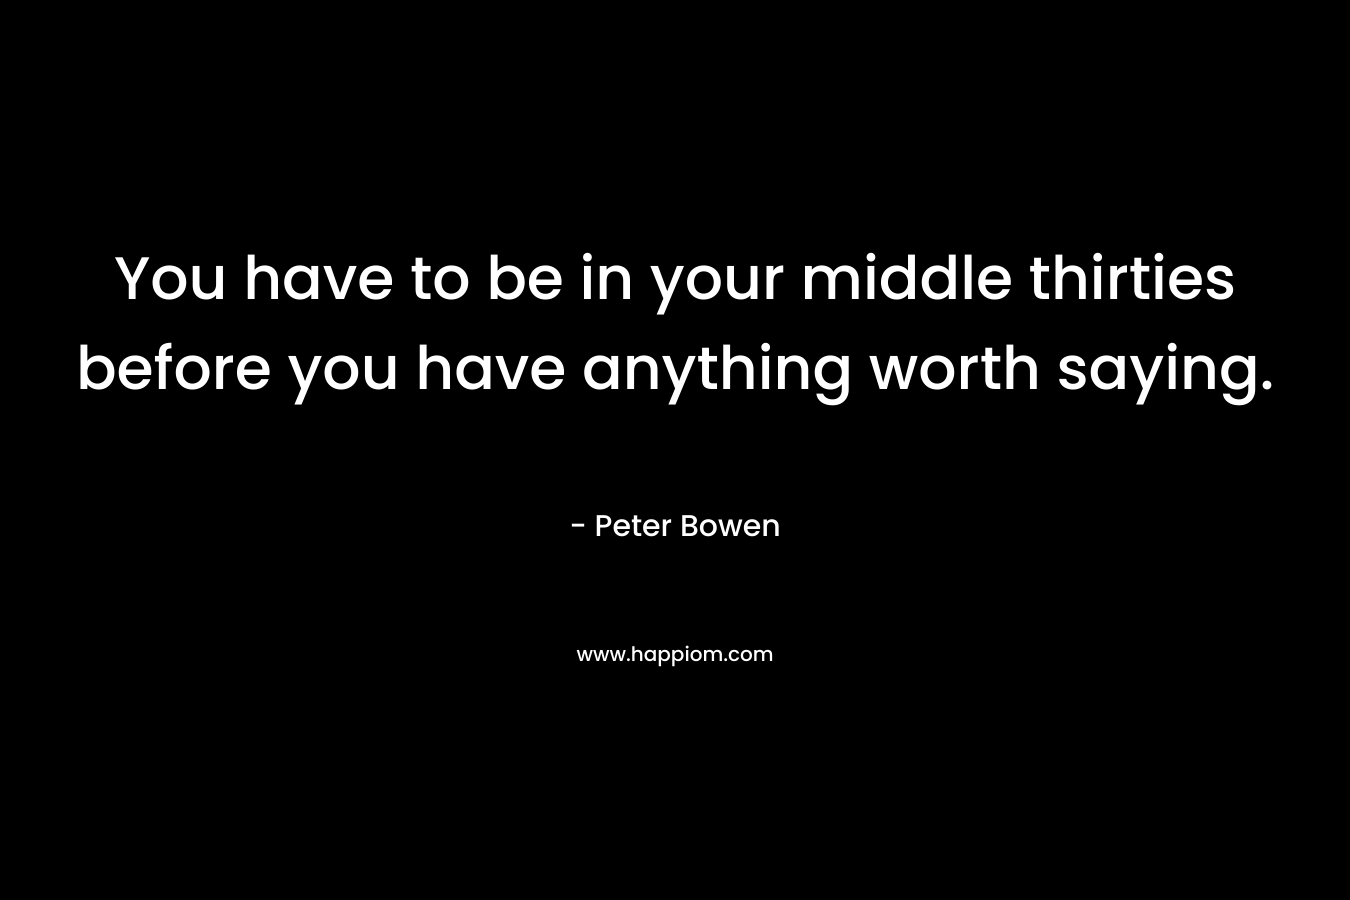 You have to be in your middle thirties before you have anything worth saying. – Peter Bowen